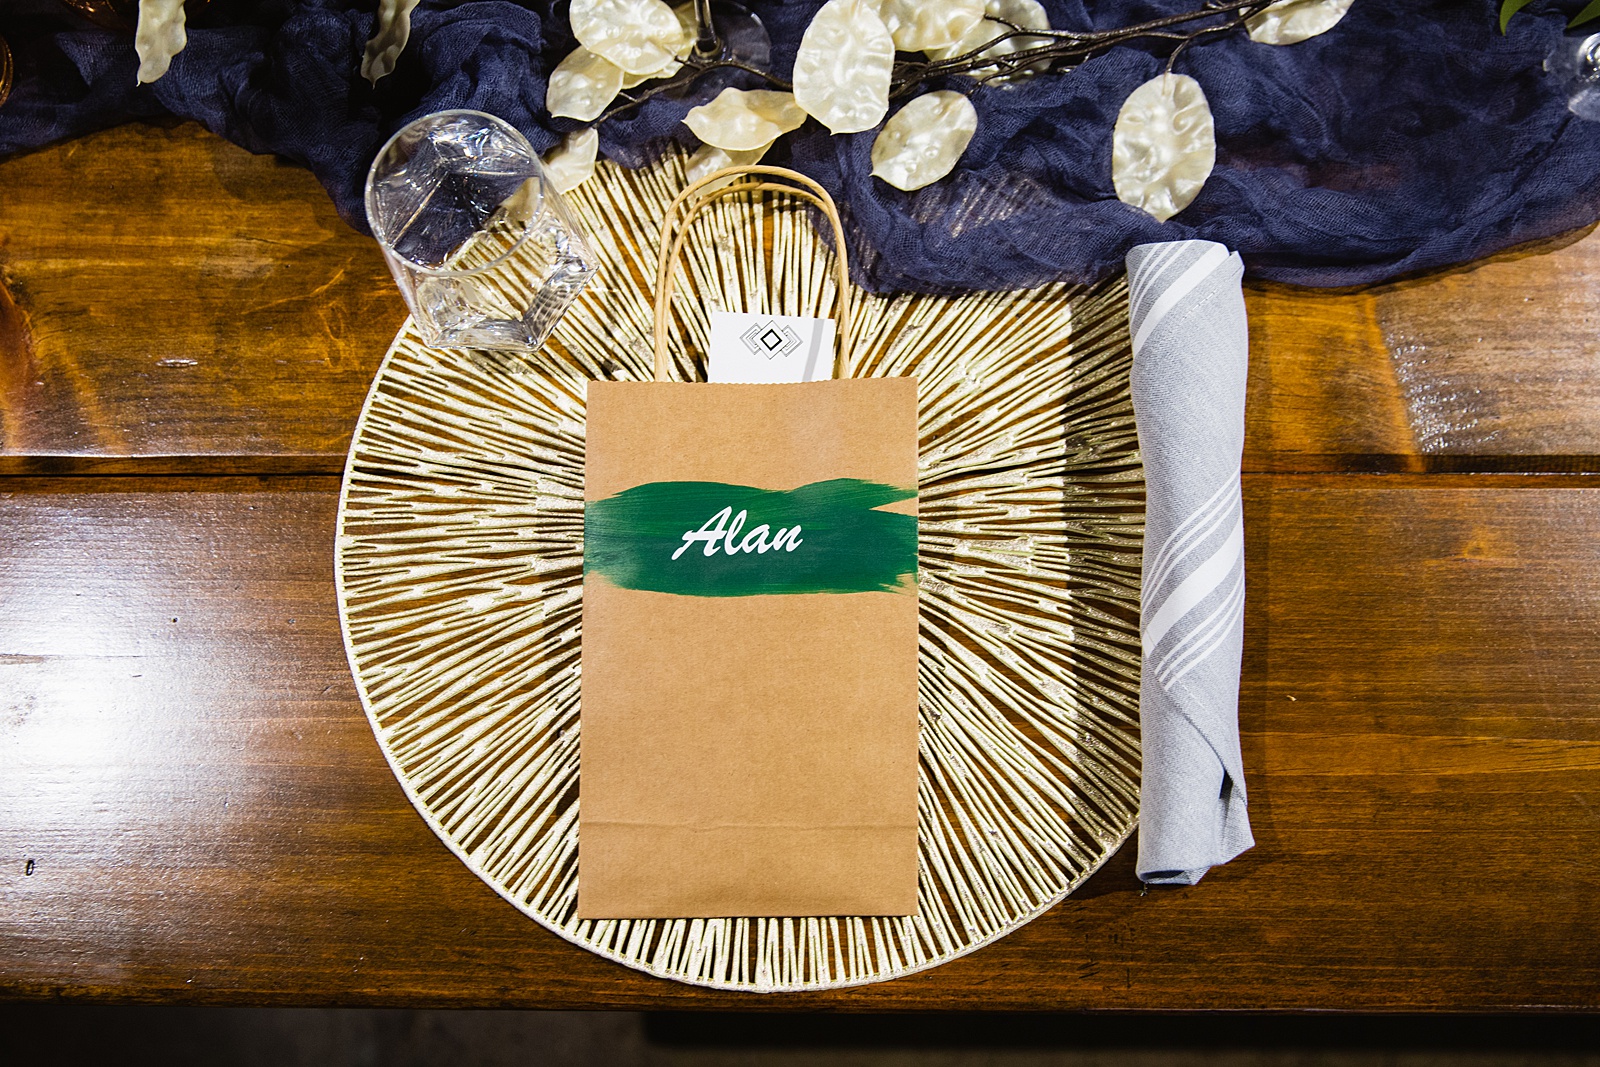 Custom giftbags and table name card for a wedding reception at MonOrchid by Phoenix wedding photographer PMA Photography.